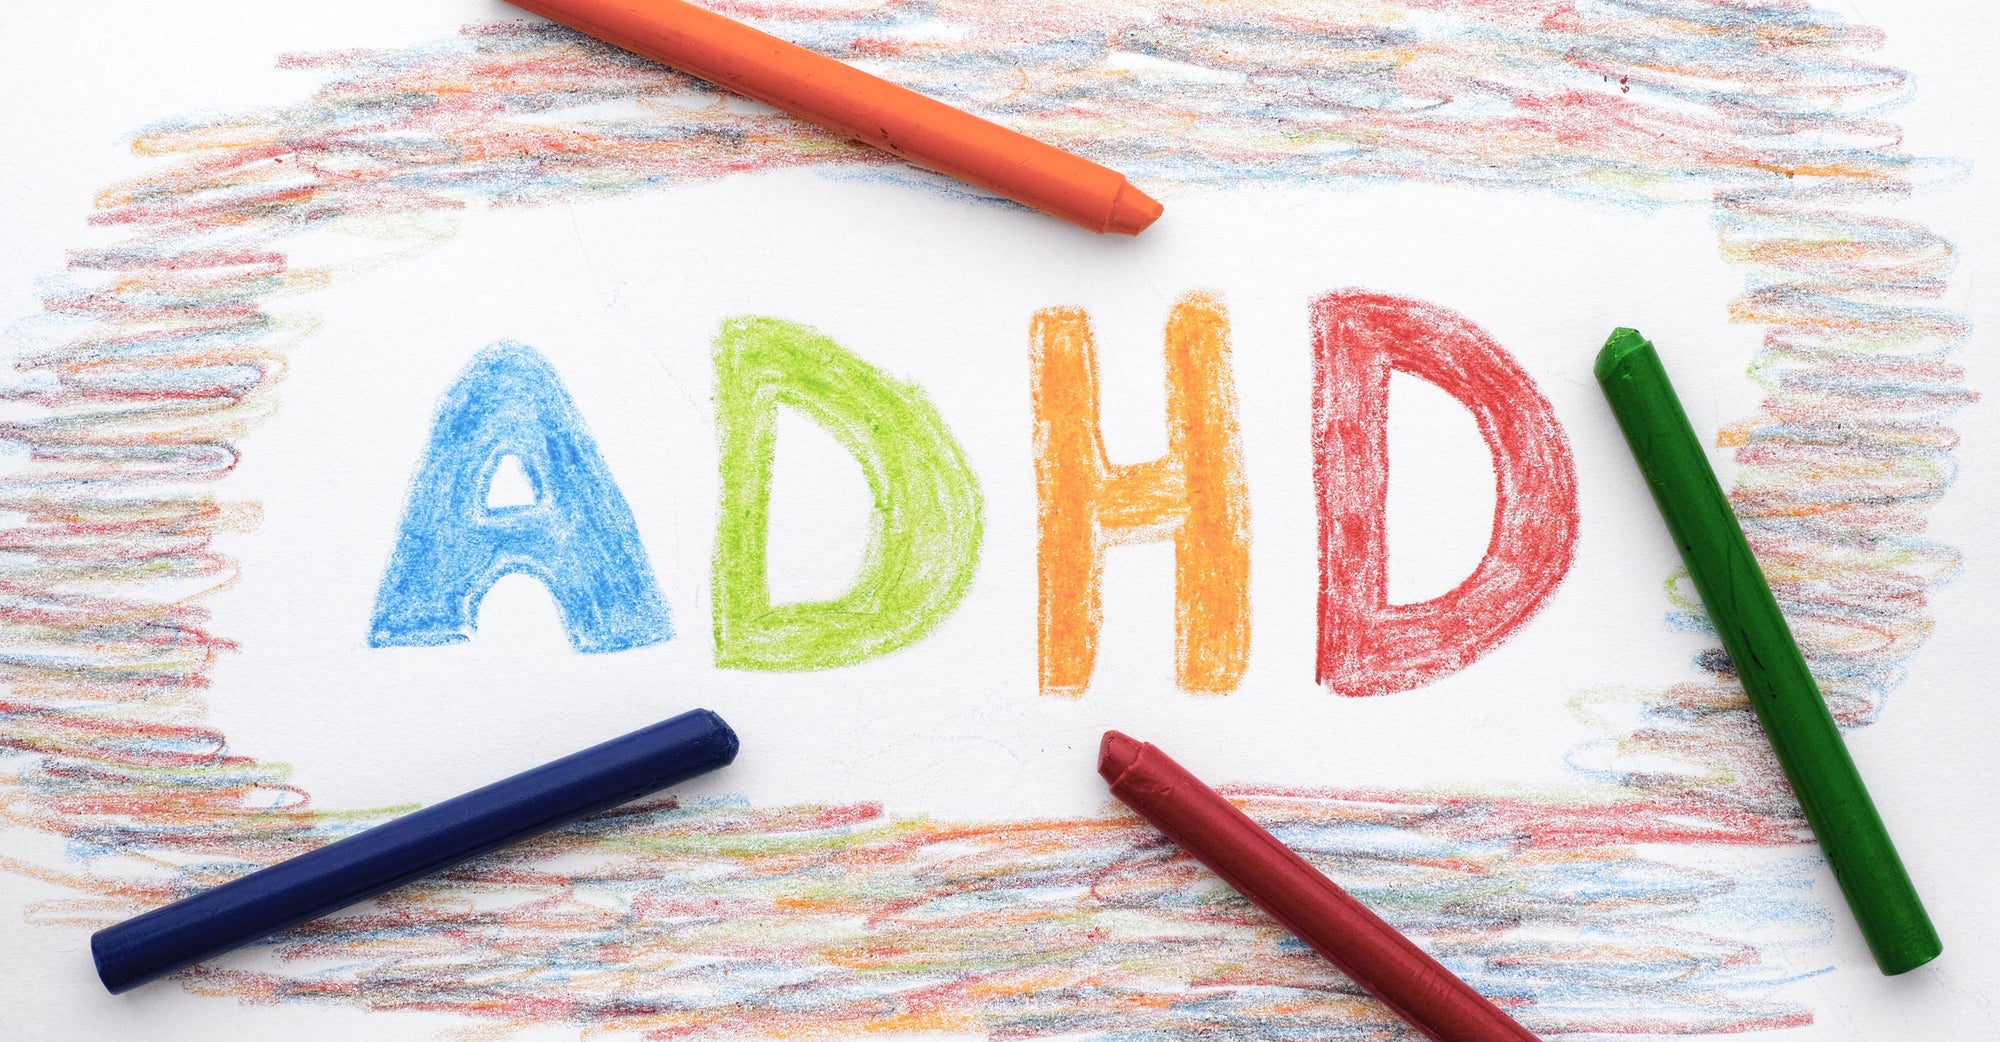 ADHD drawn in letters